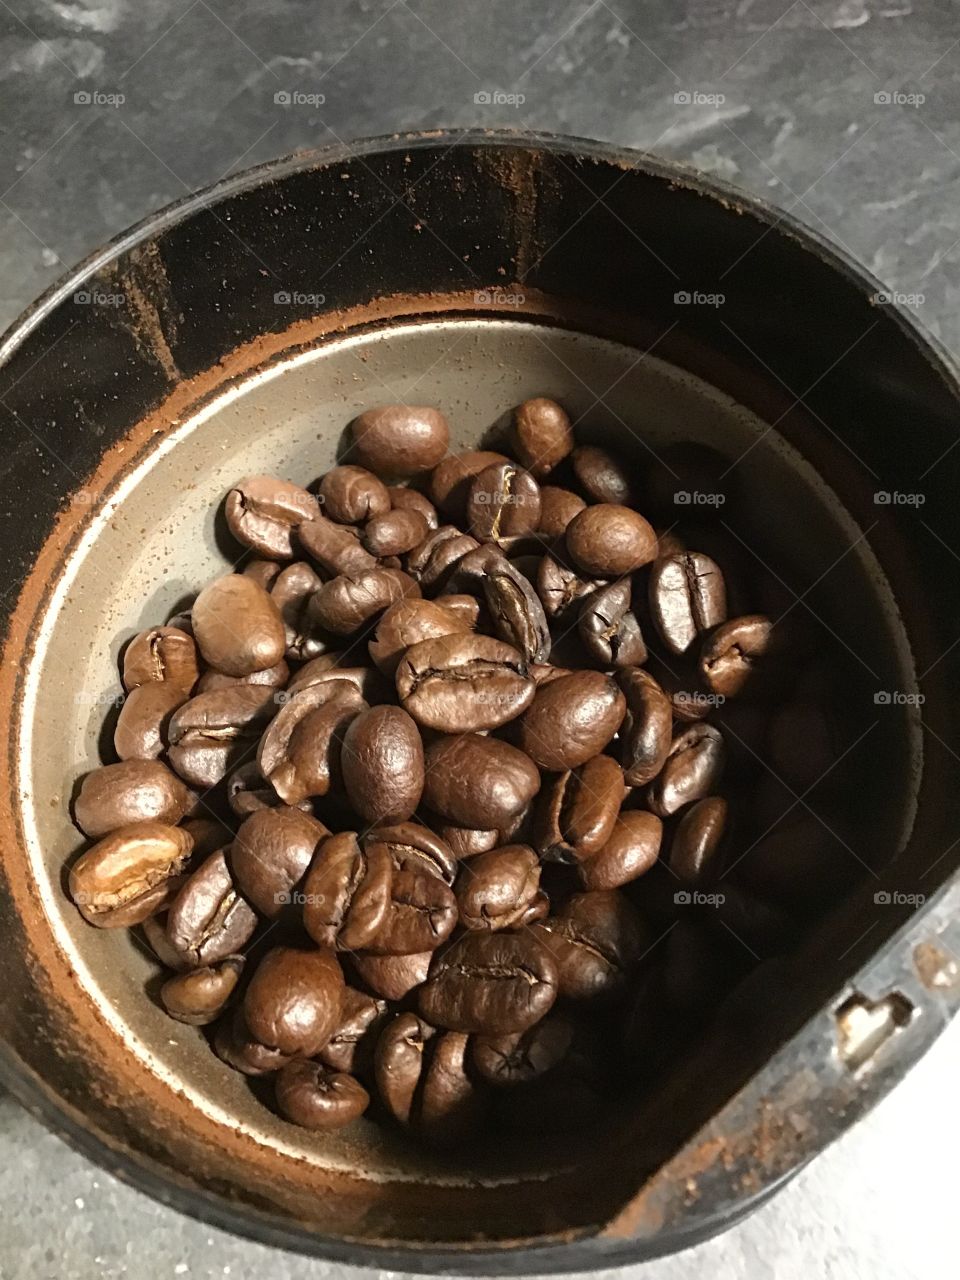 Coffee beans from Costa Rica in the grinder 